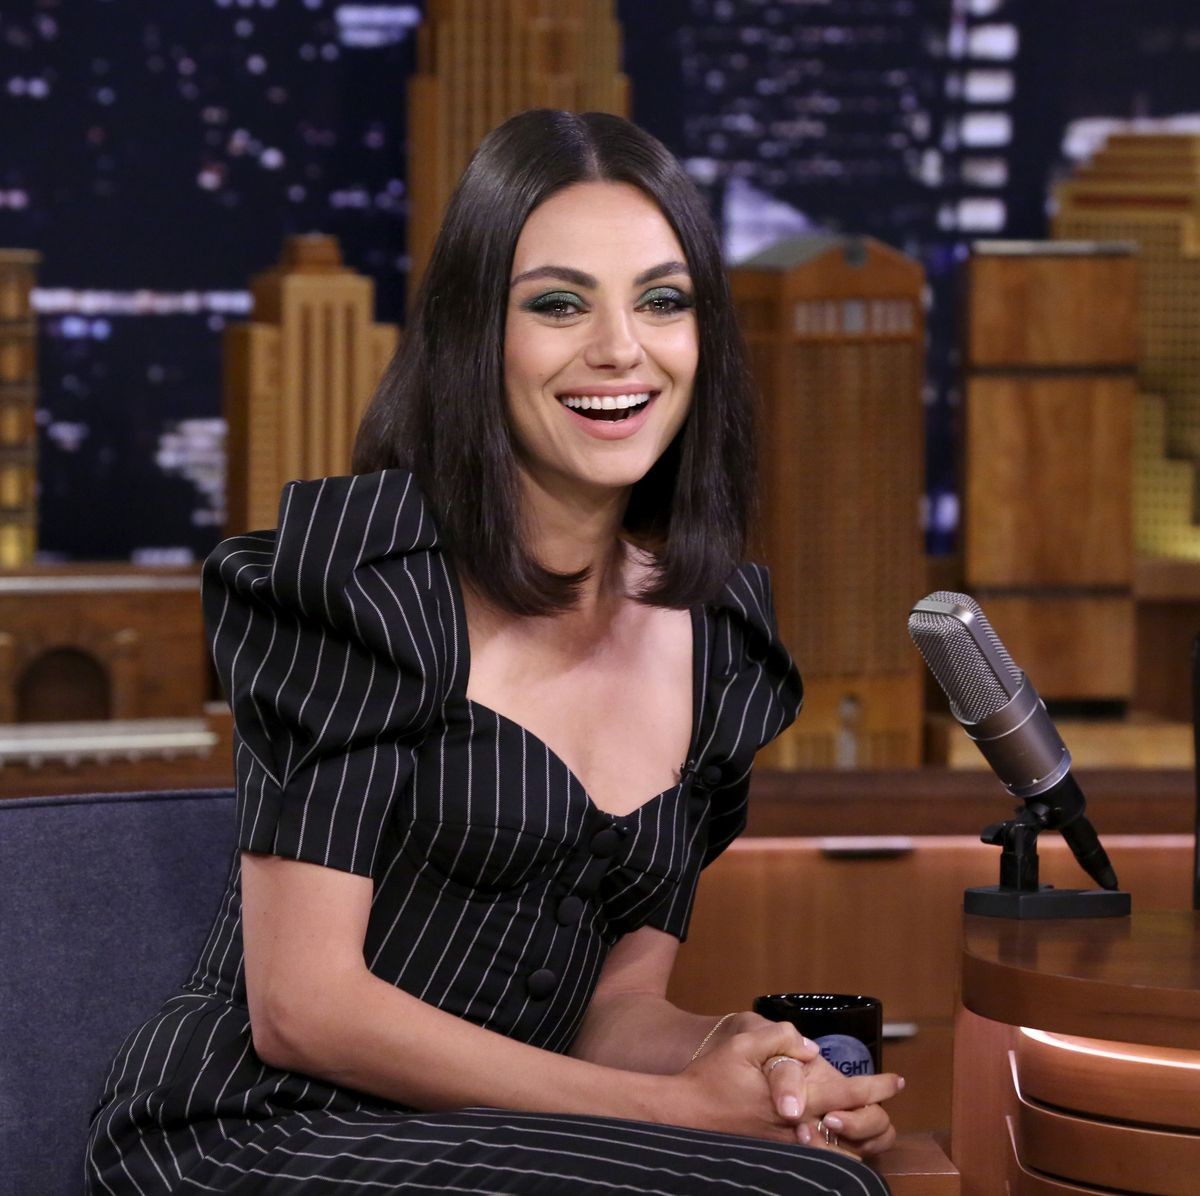 Mila Kunis as a guest on the Tonight Show